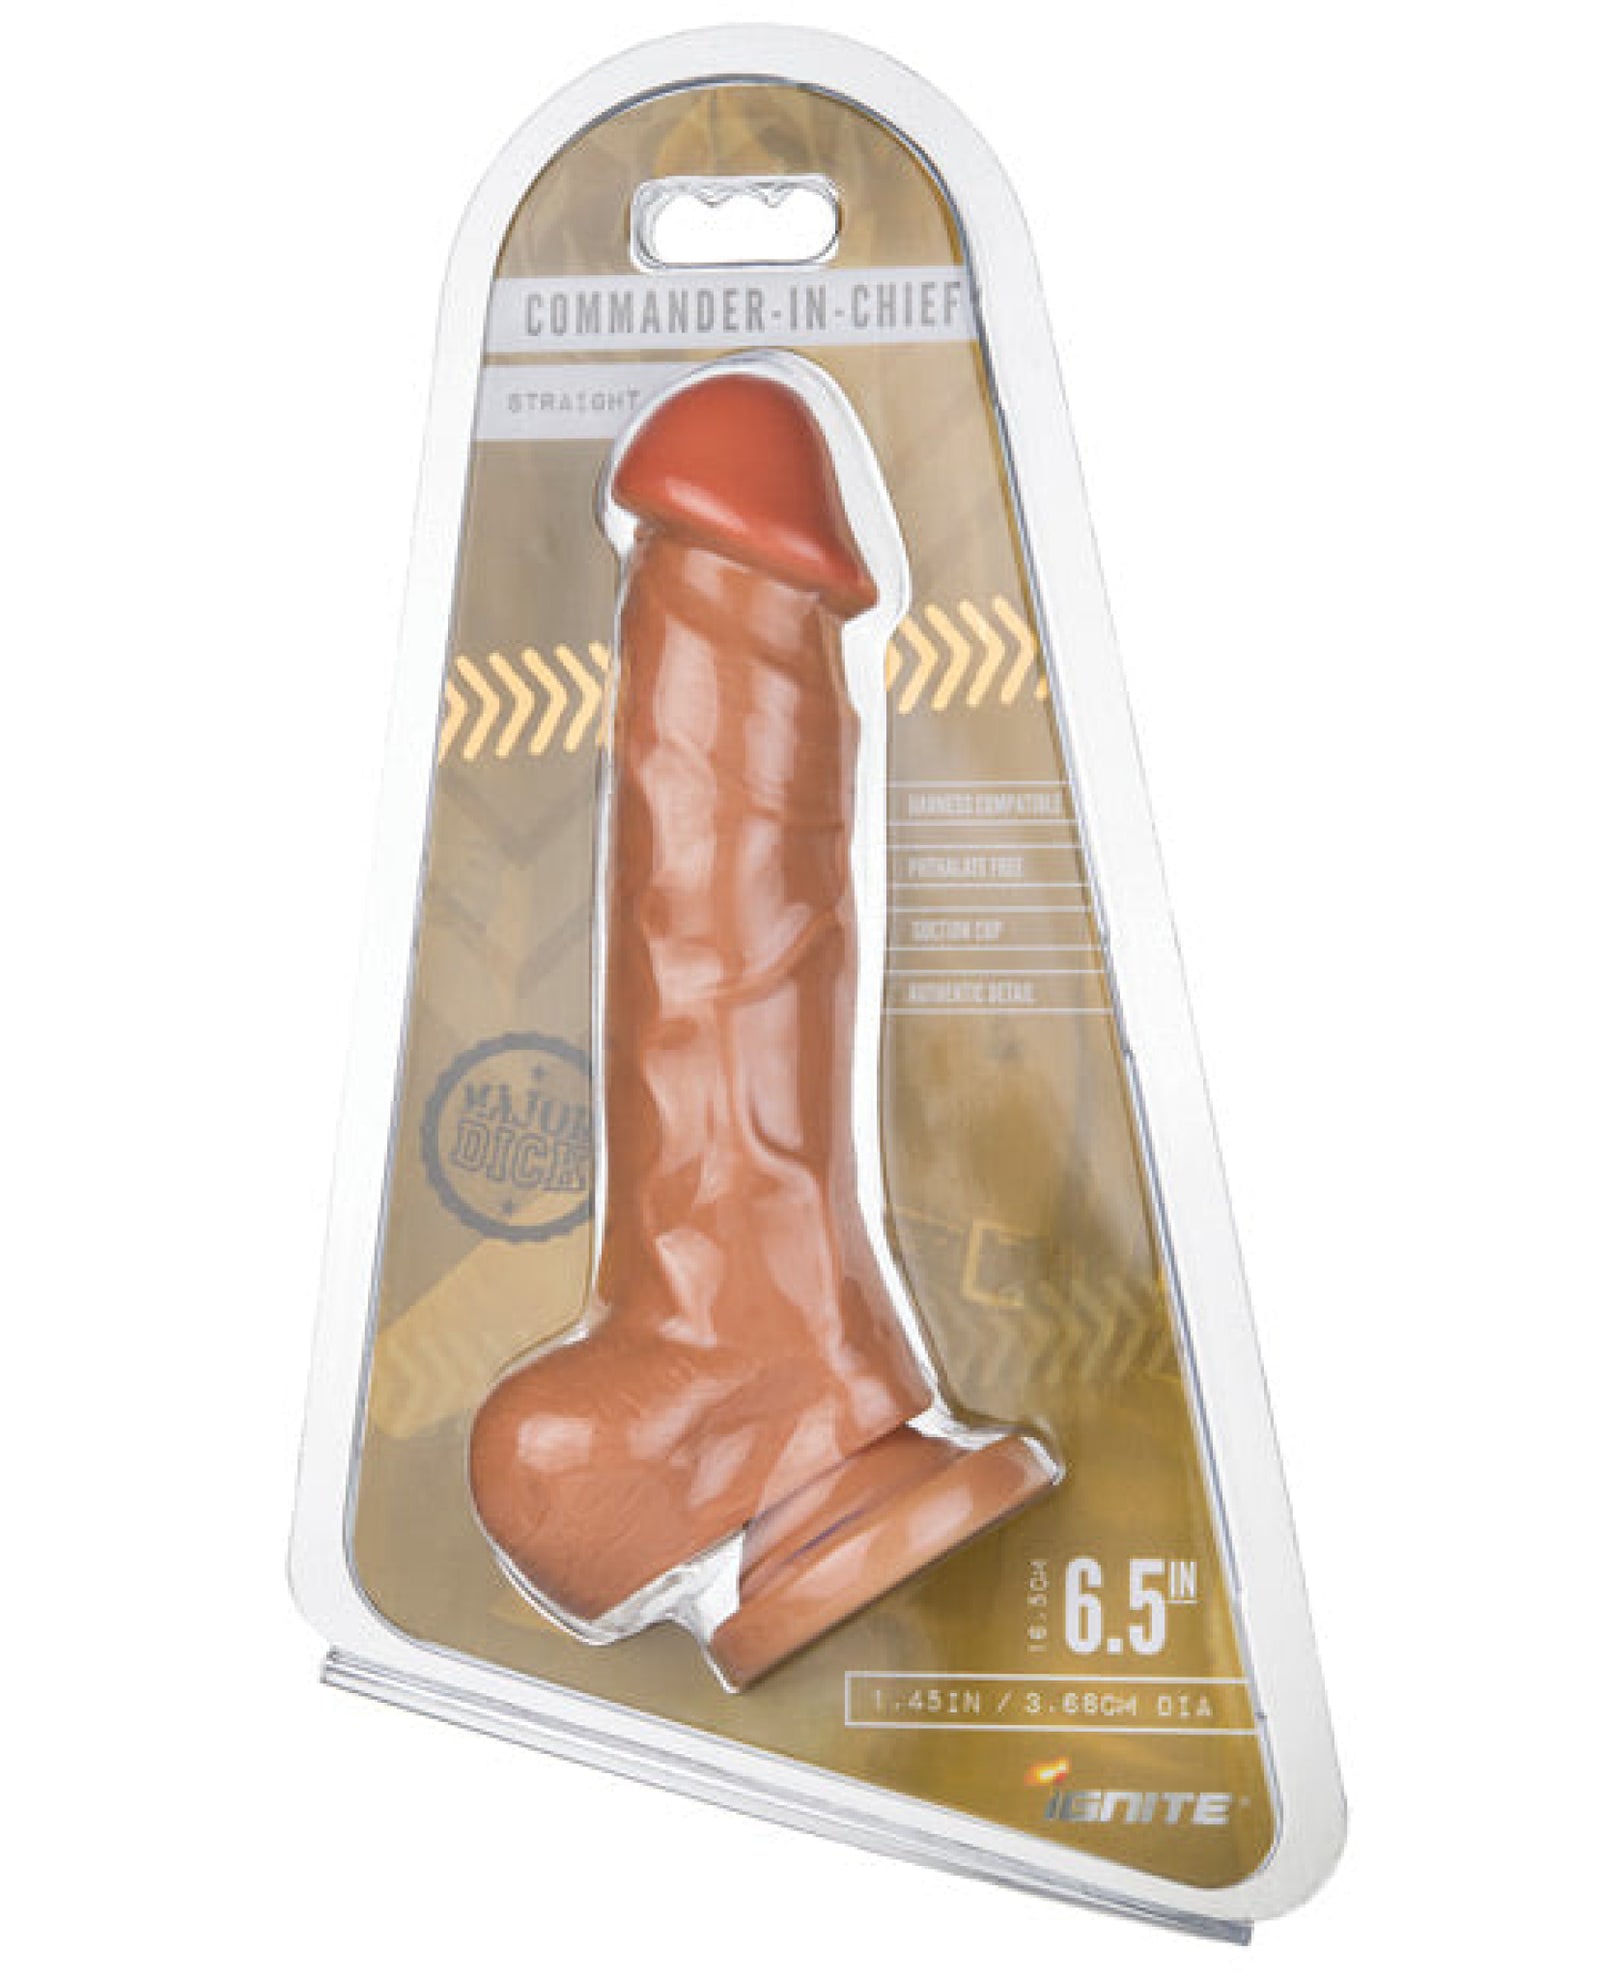 Major Dick Straight W/balls & Suction Cup Commander In Chief Si Novelties